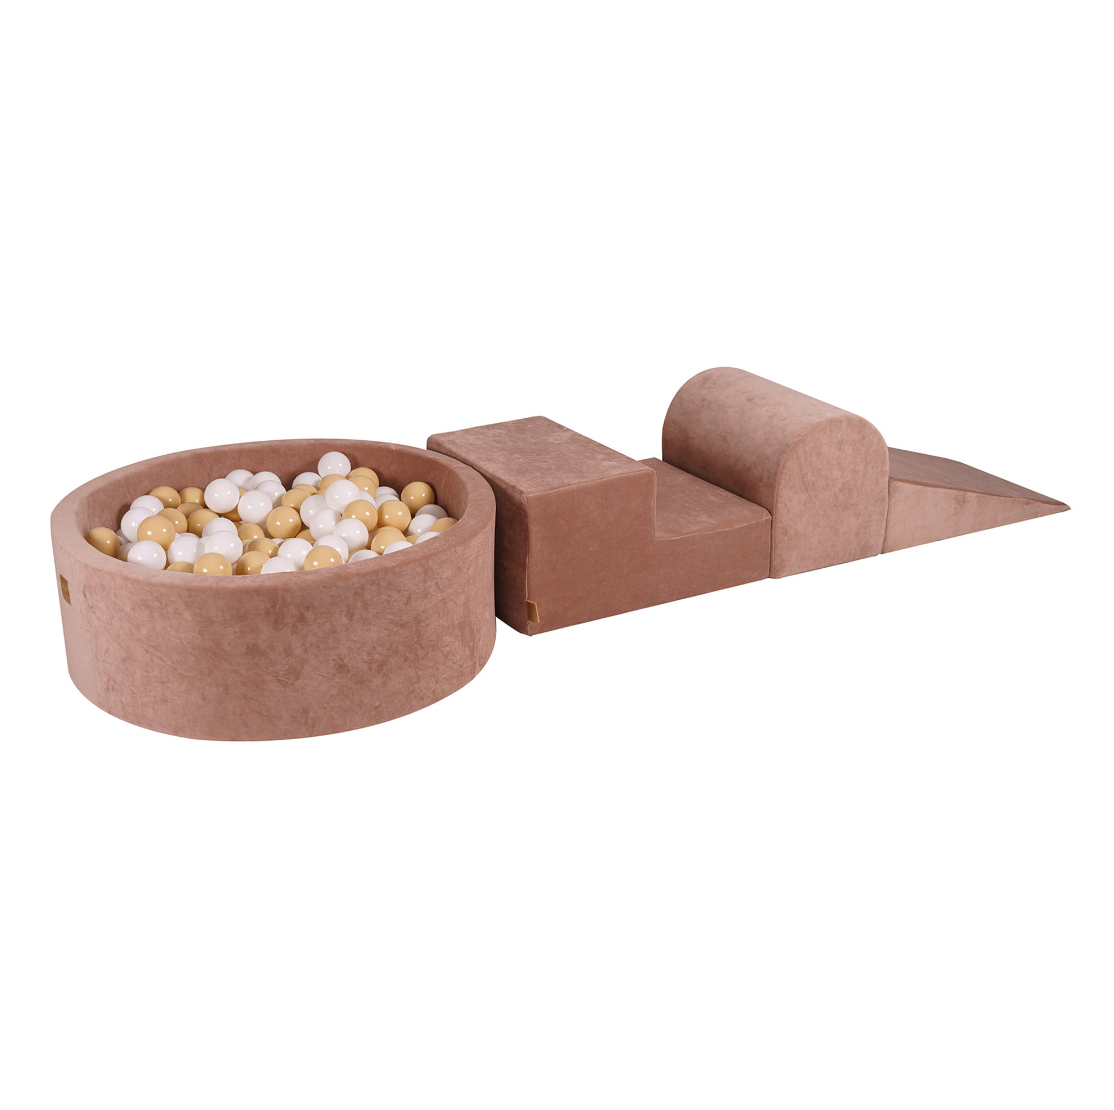 Playsystem with Ball Pit, Velvet Beige Brown